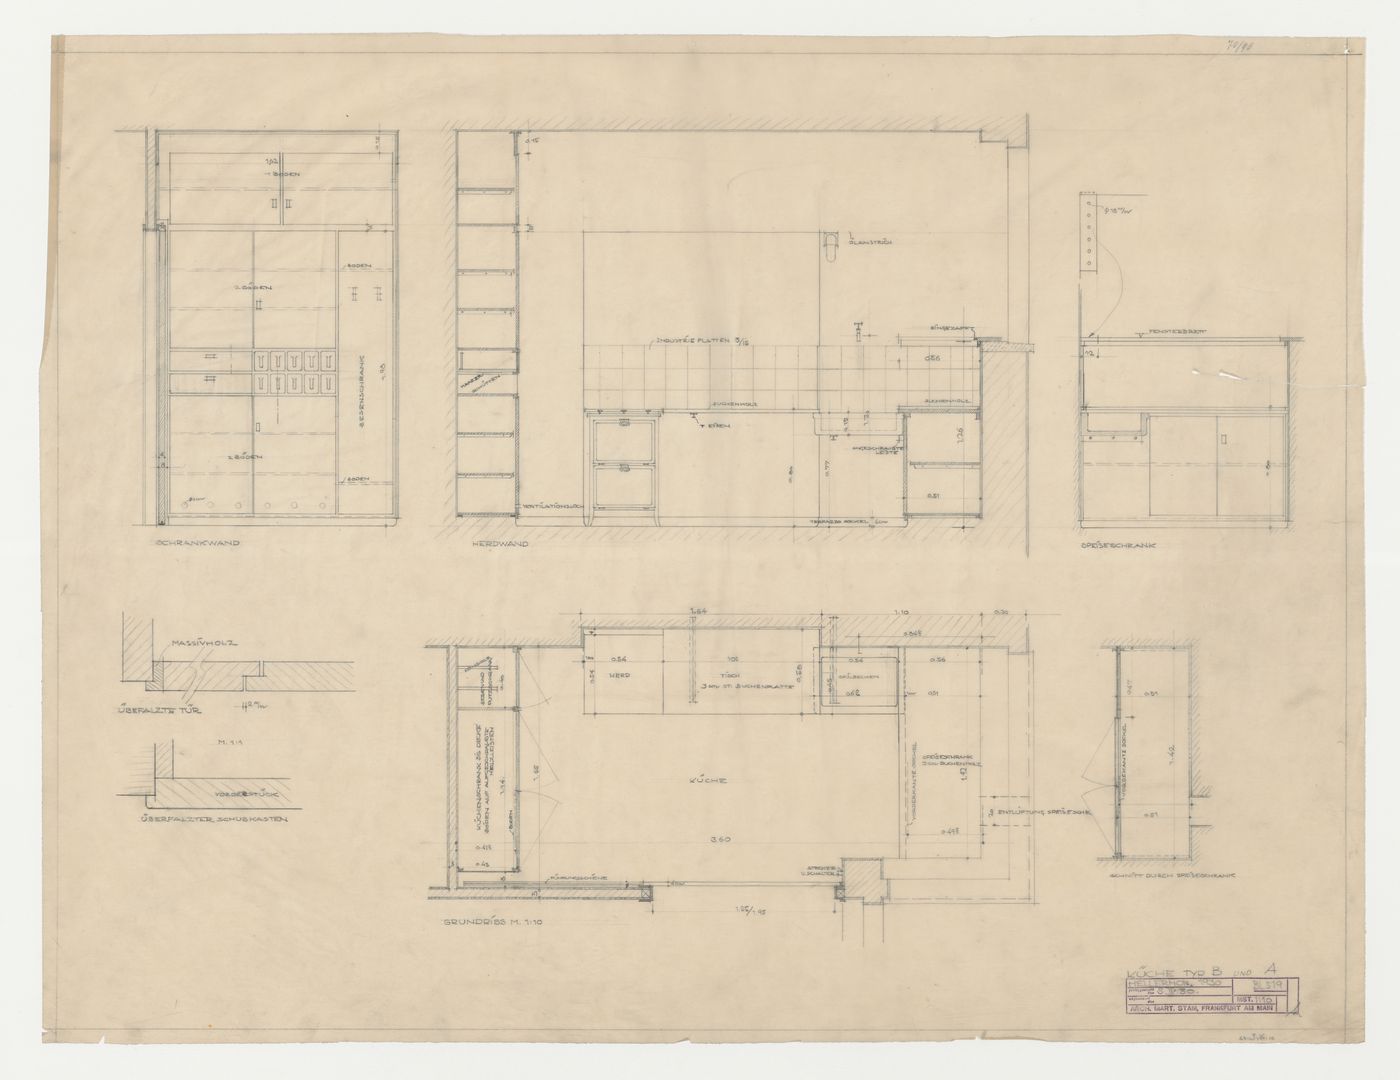 Plan, elevations, and sectional details for a kitchen for type A and type B housing units, Hellerhof Housing Estate, Frankfurt am Main, Germany